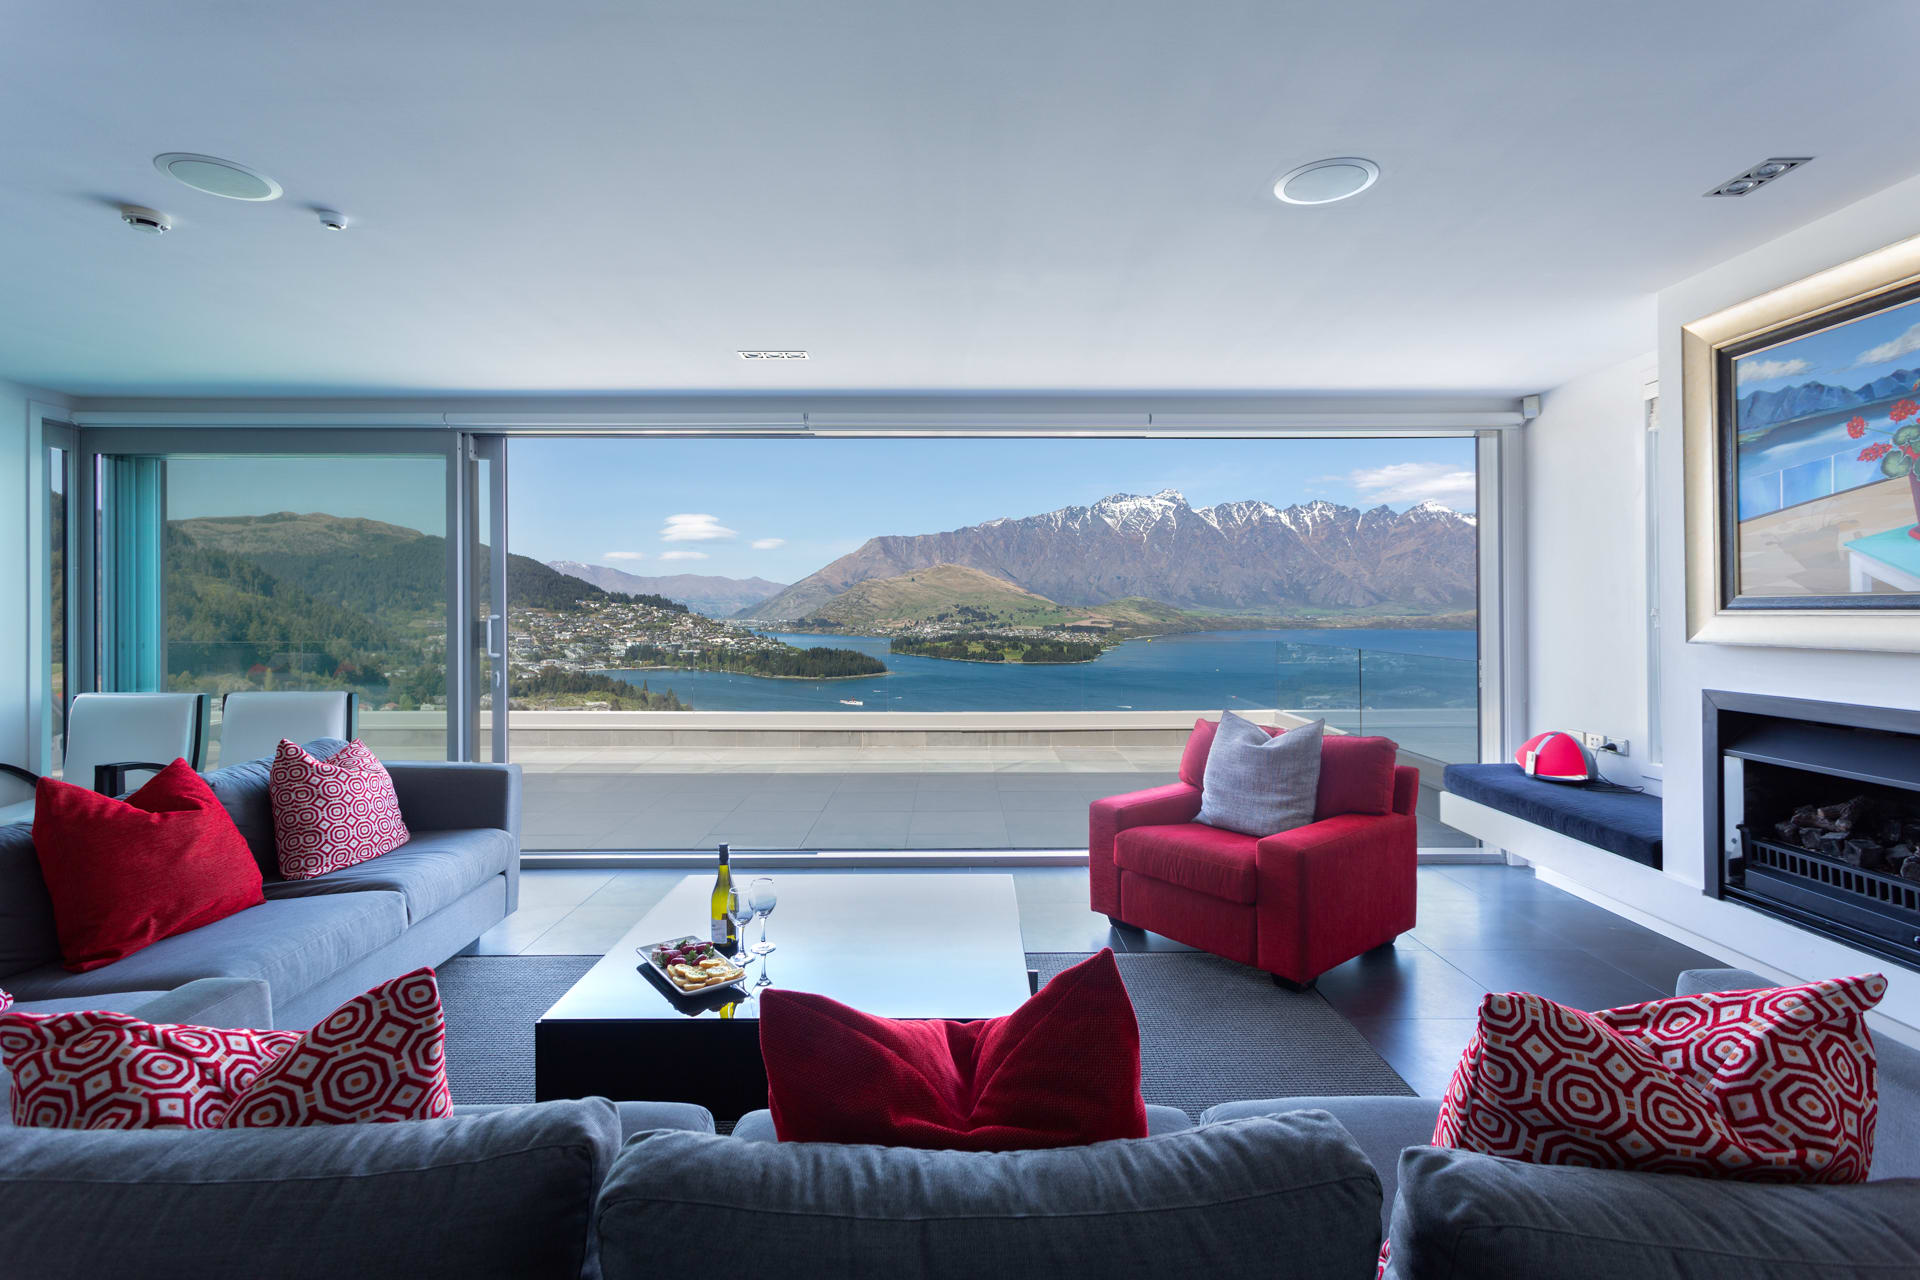 Incredible mountain views from the lounge area